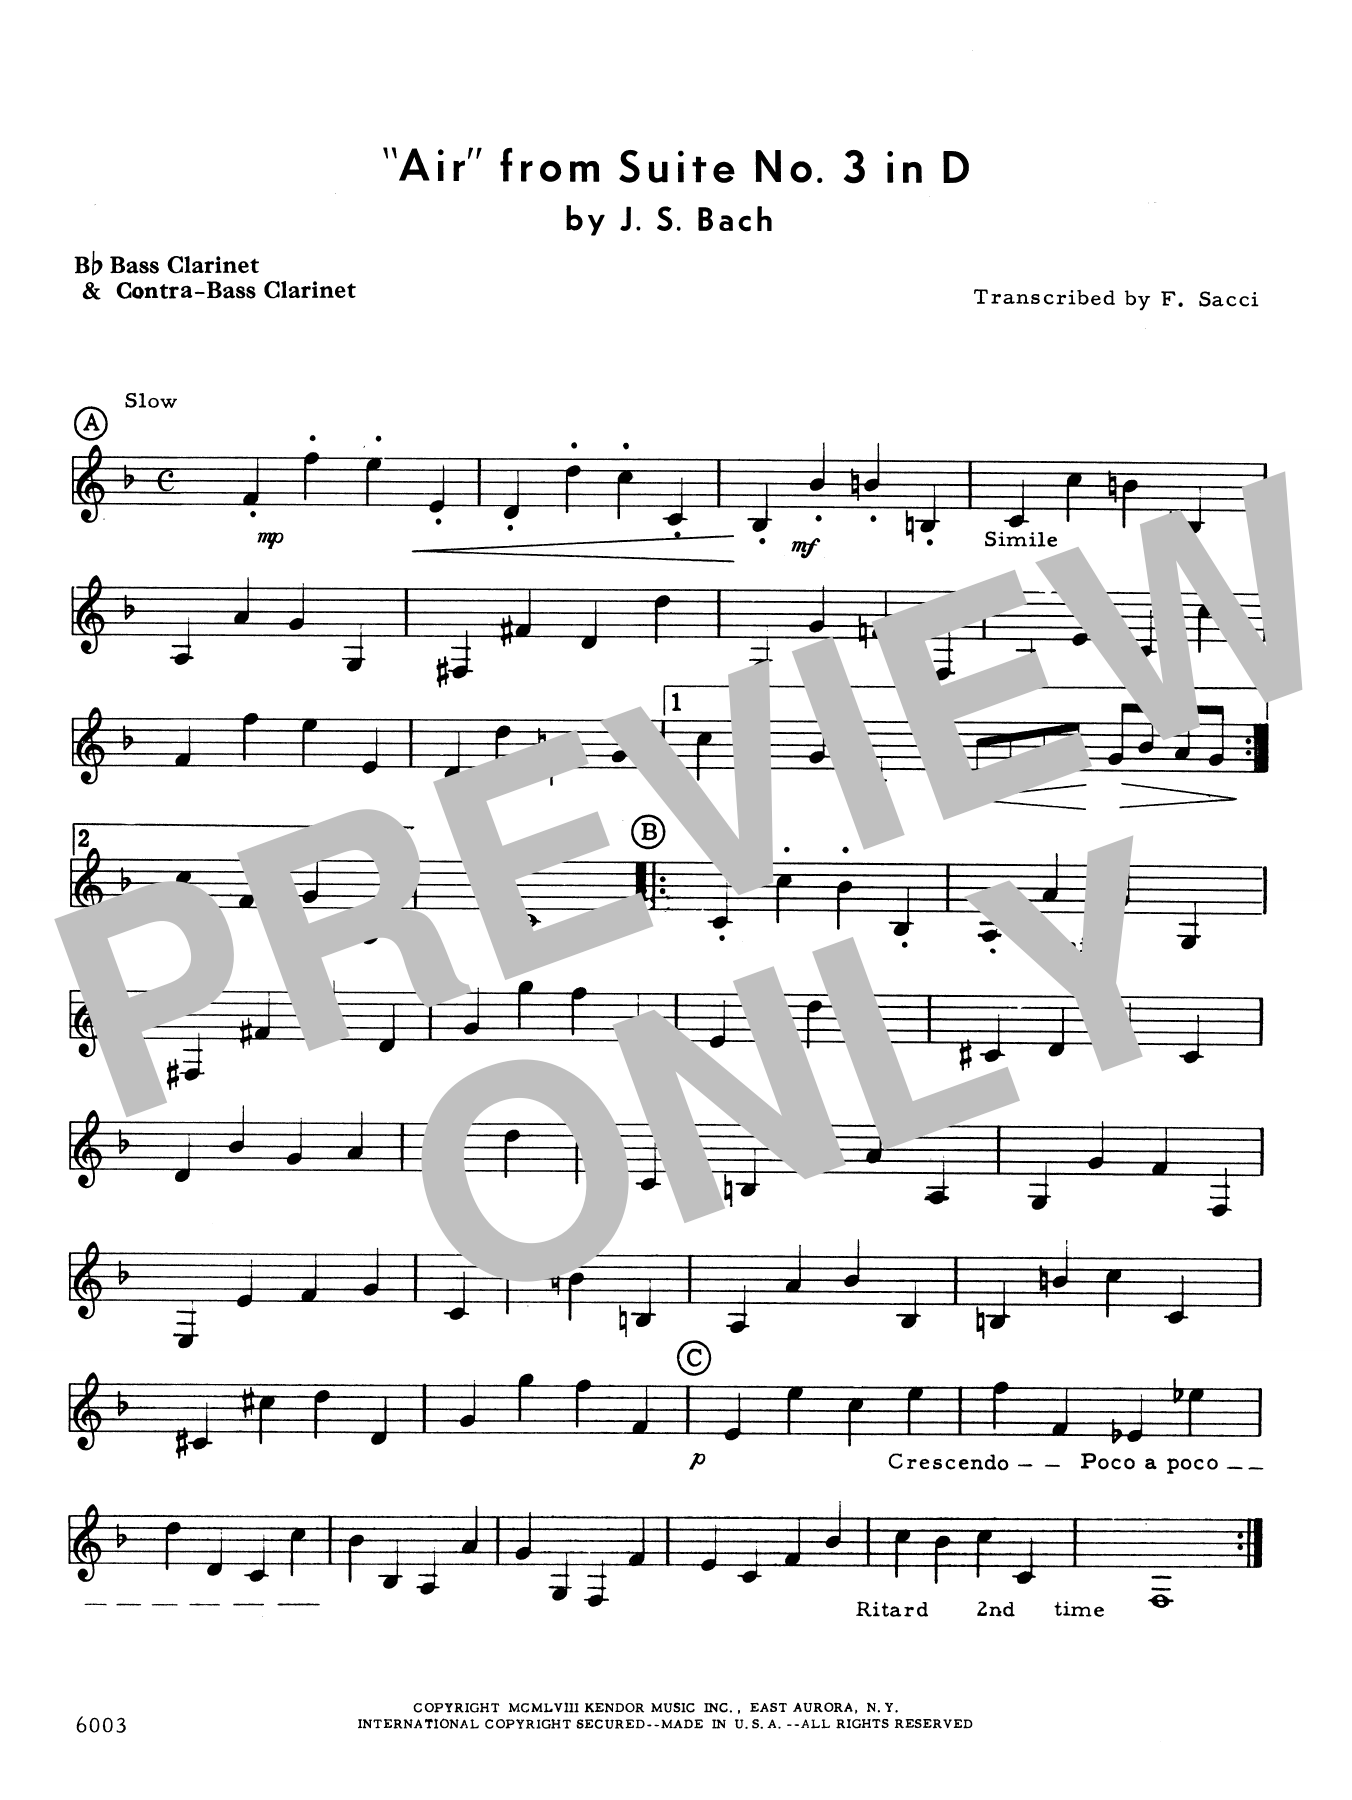 Download Frank J. Sacci Air From Suite #3 In D - Bb Clarinet/Ba Sheet Music